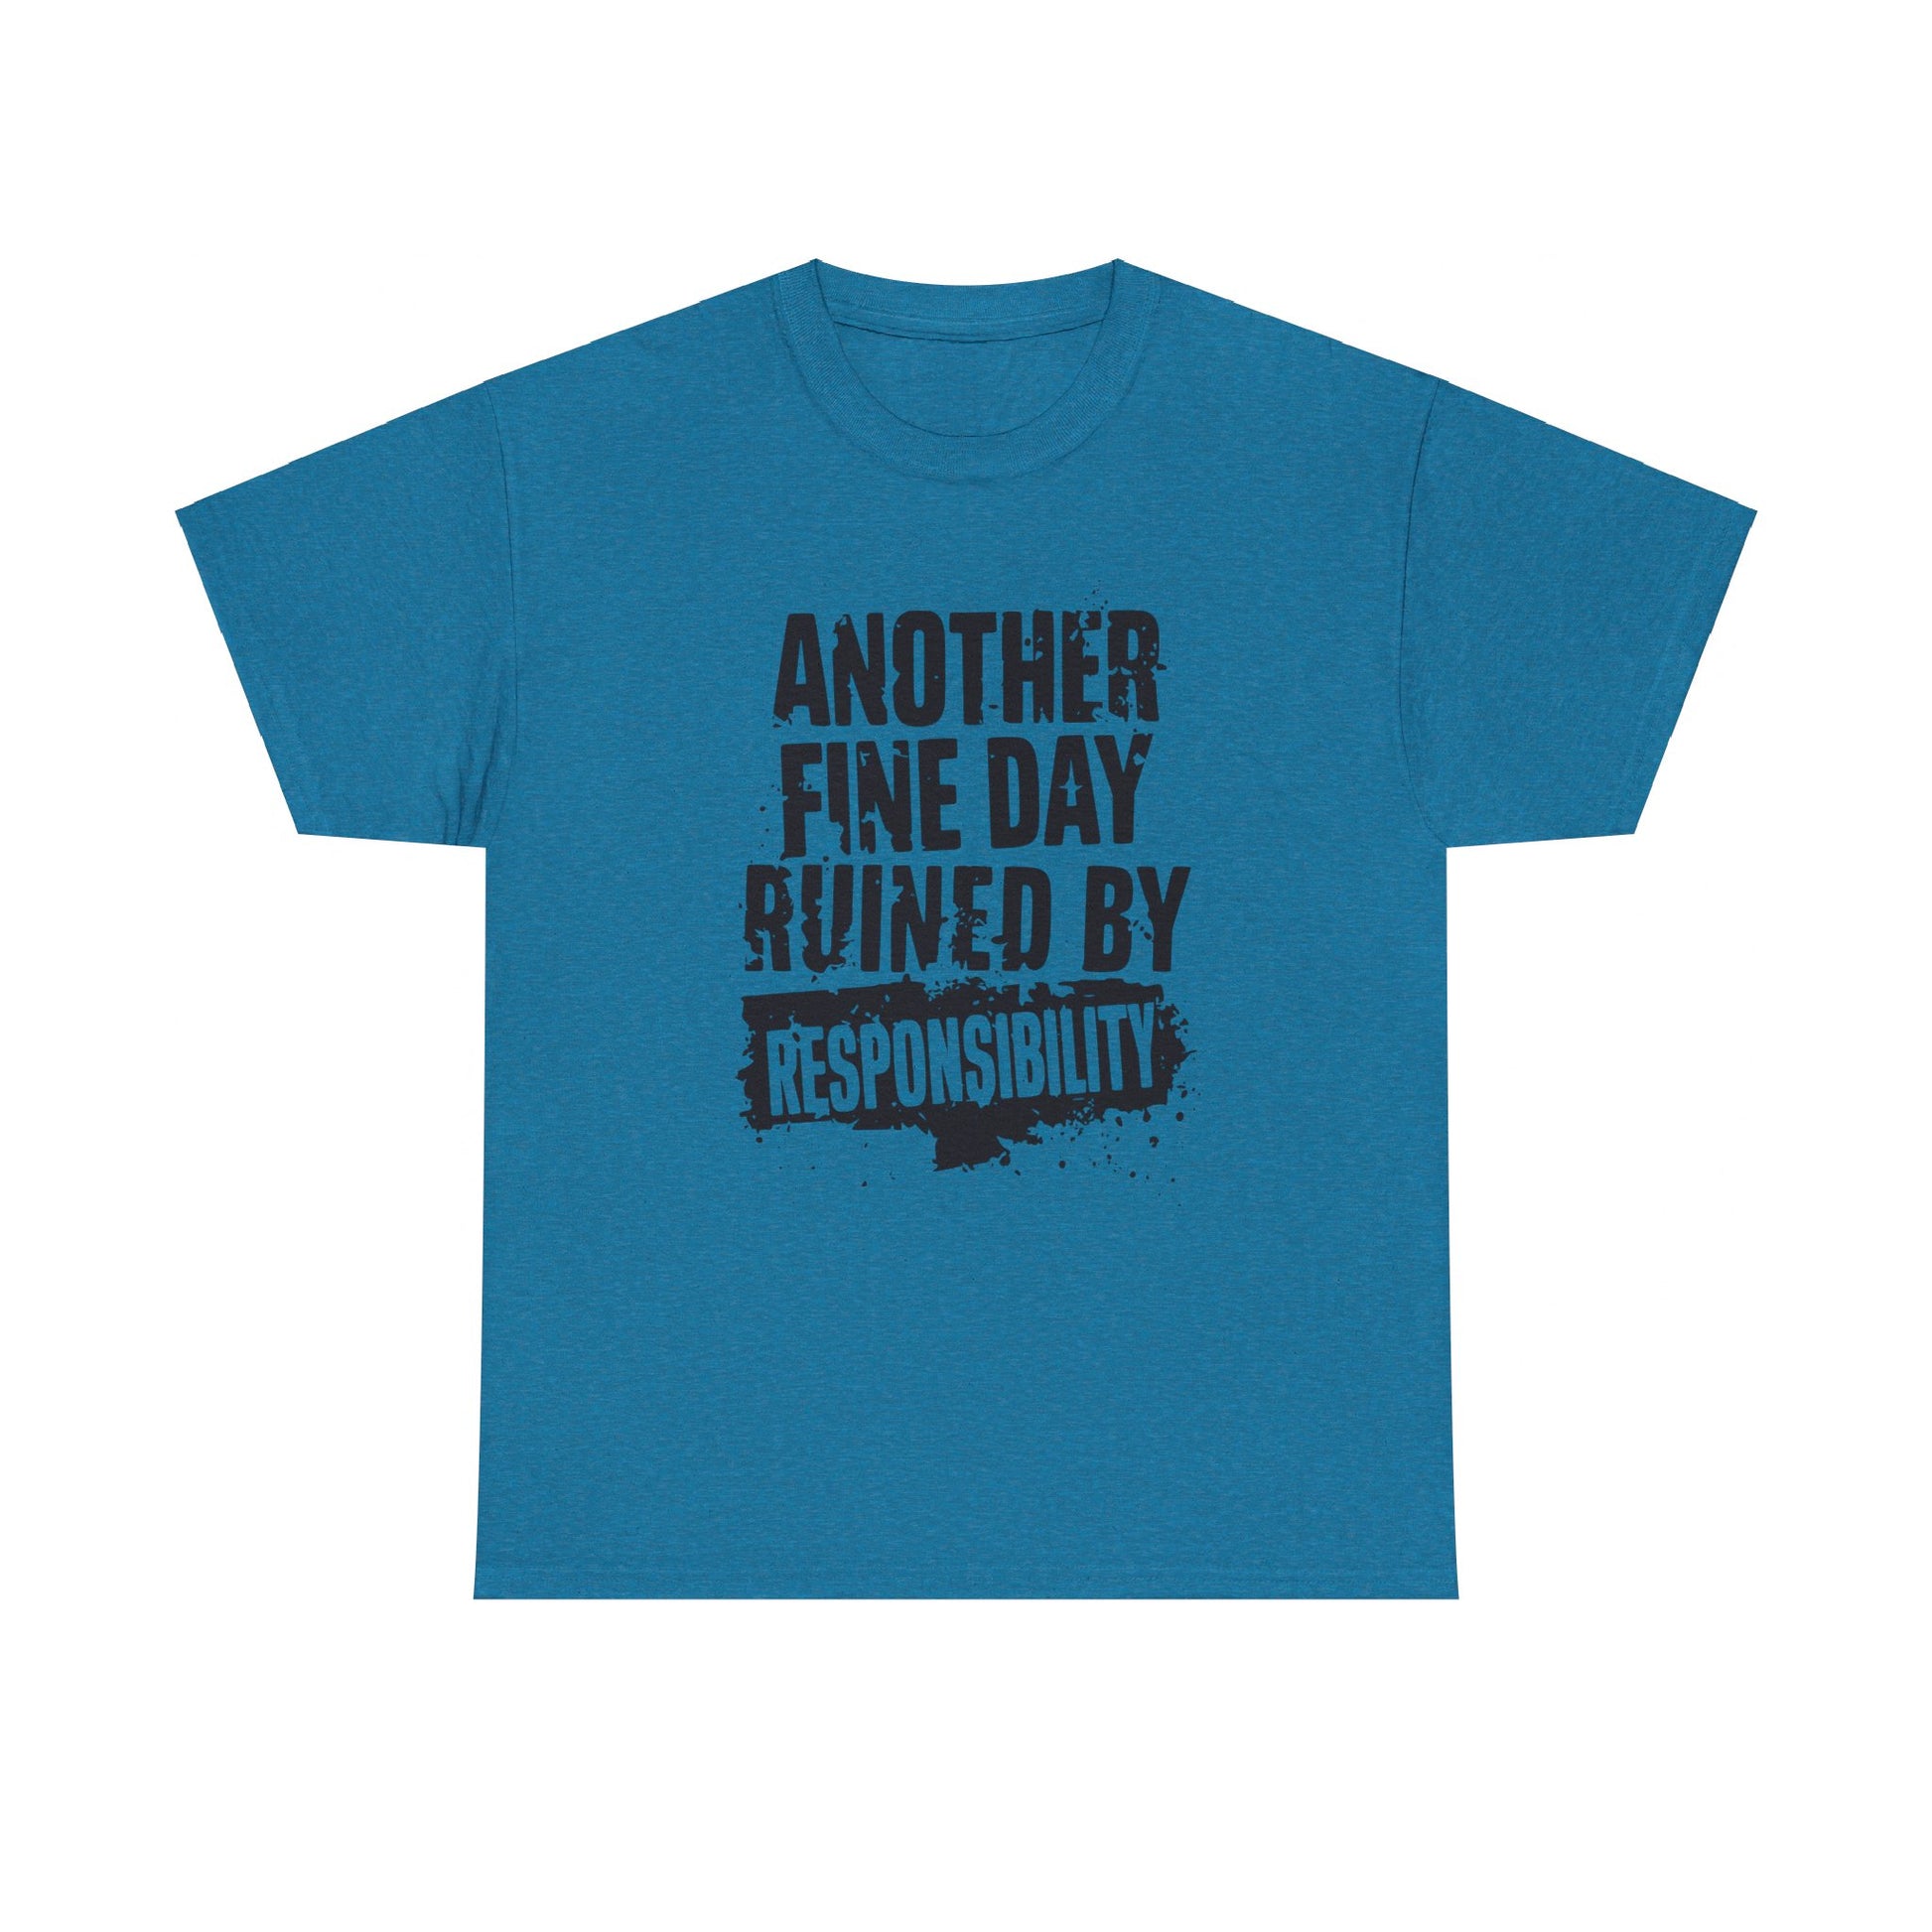 "Funny Sarcastic T-Shirt for Construction Workers"